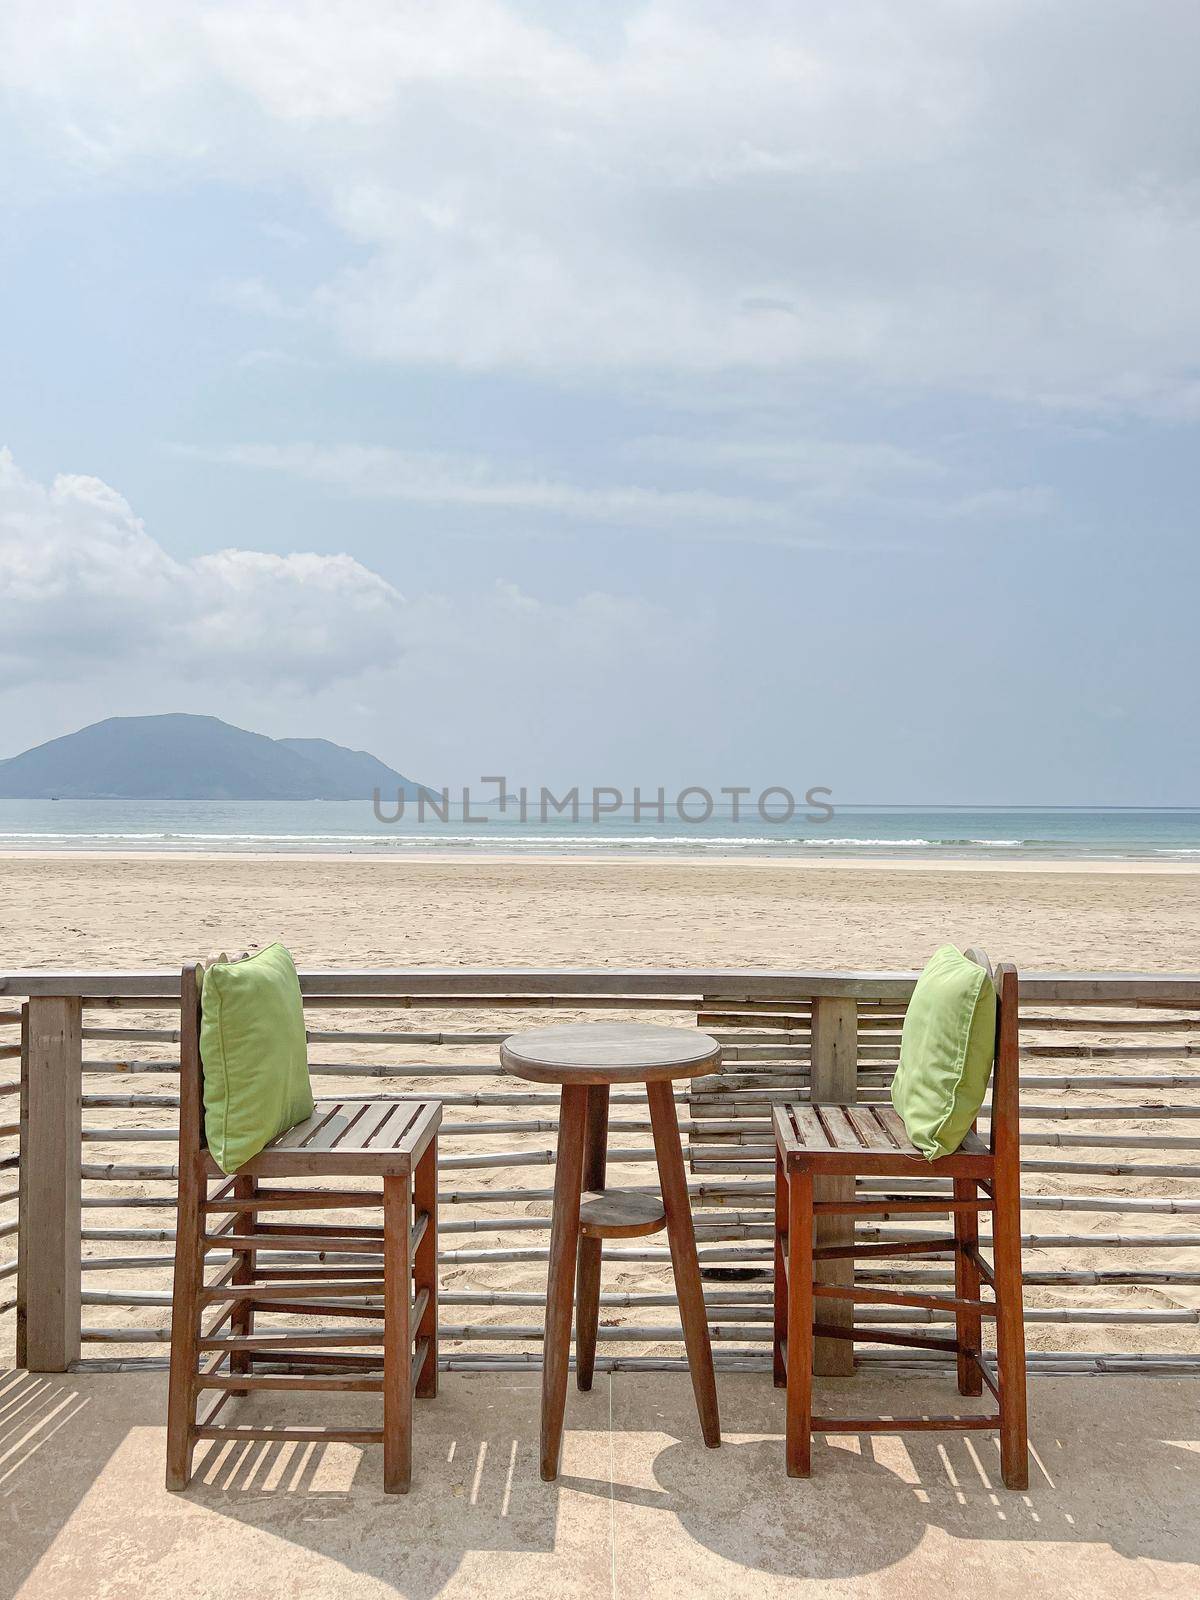 Outdoor cafe with tables and chairs at the beach, perfect summer vacation by makidotvn